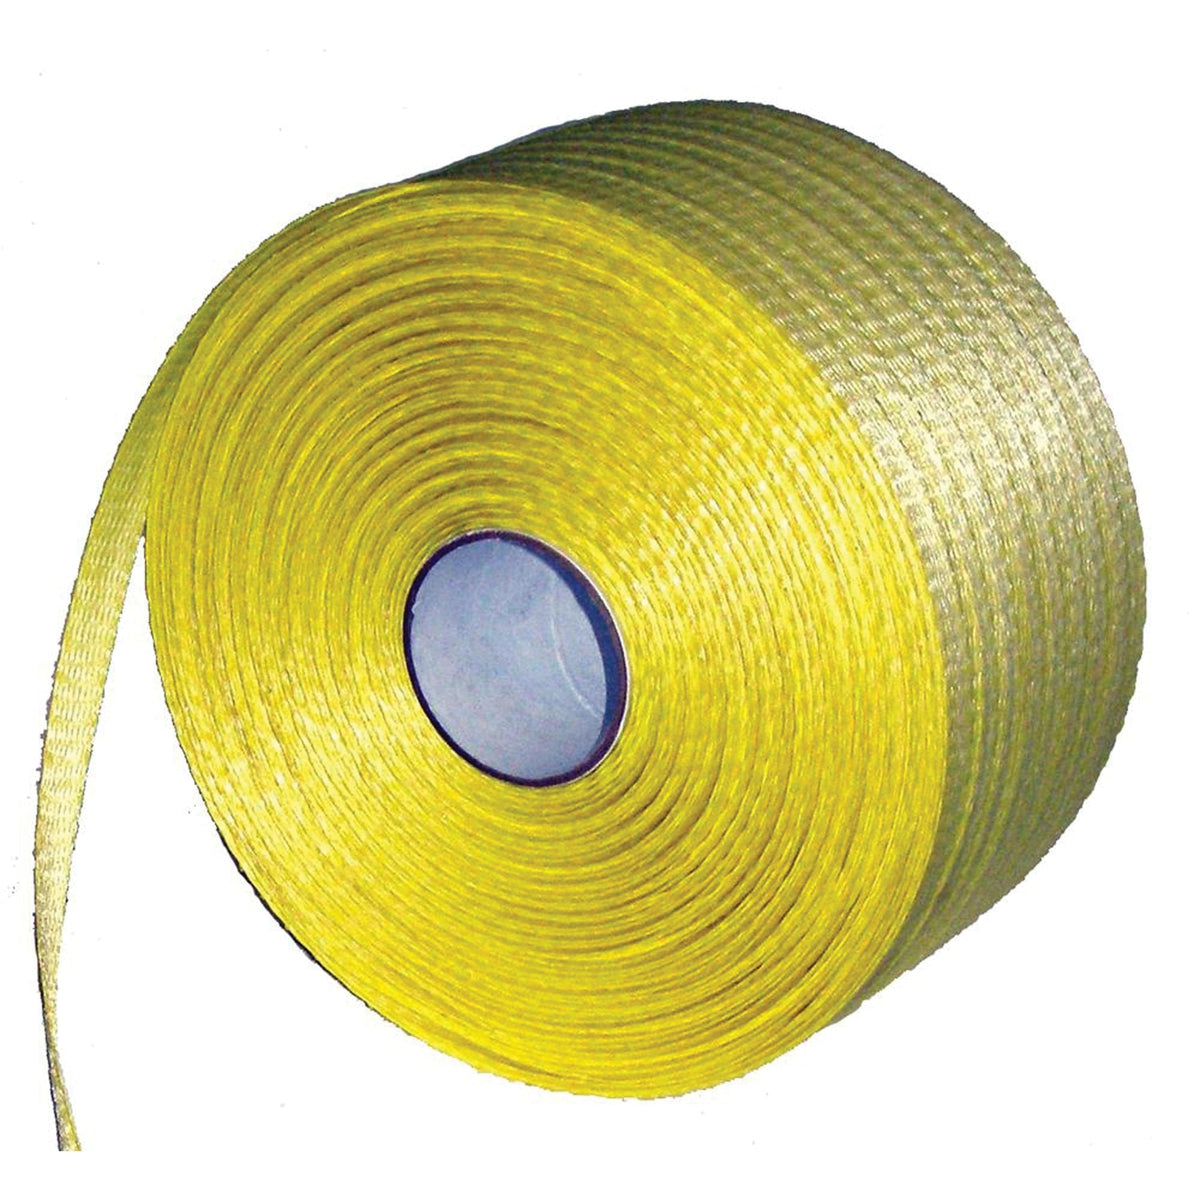 Dr. Shrink Qualifies for Free Shipping Dr. Shrink 1/2" x 3900' Woven Cord #DS-500